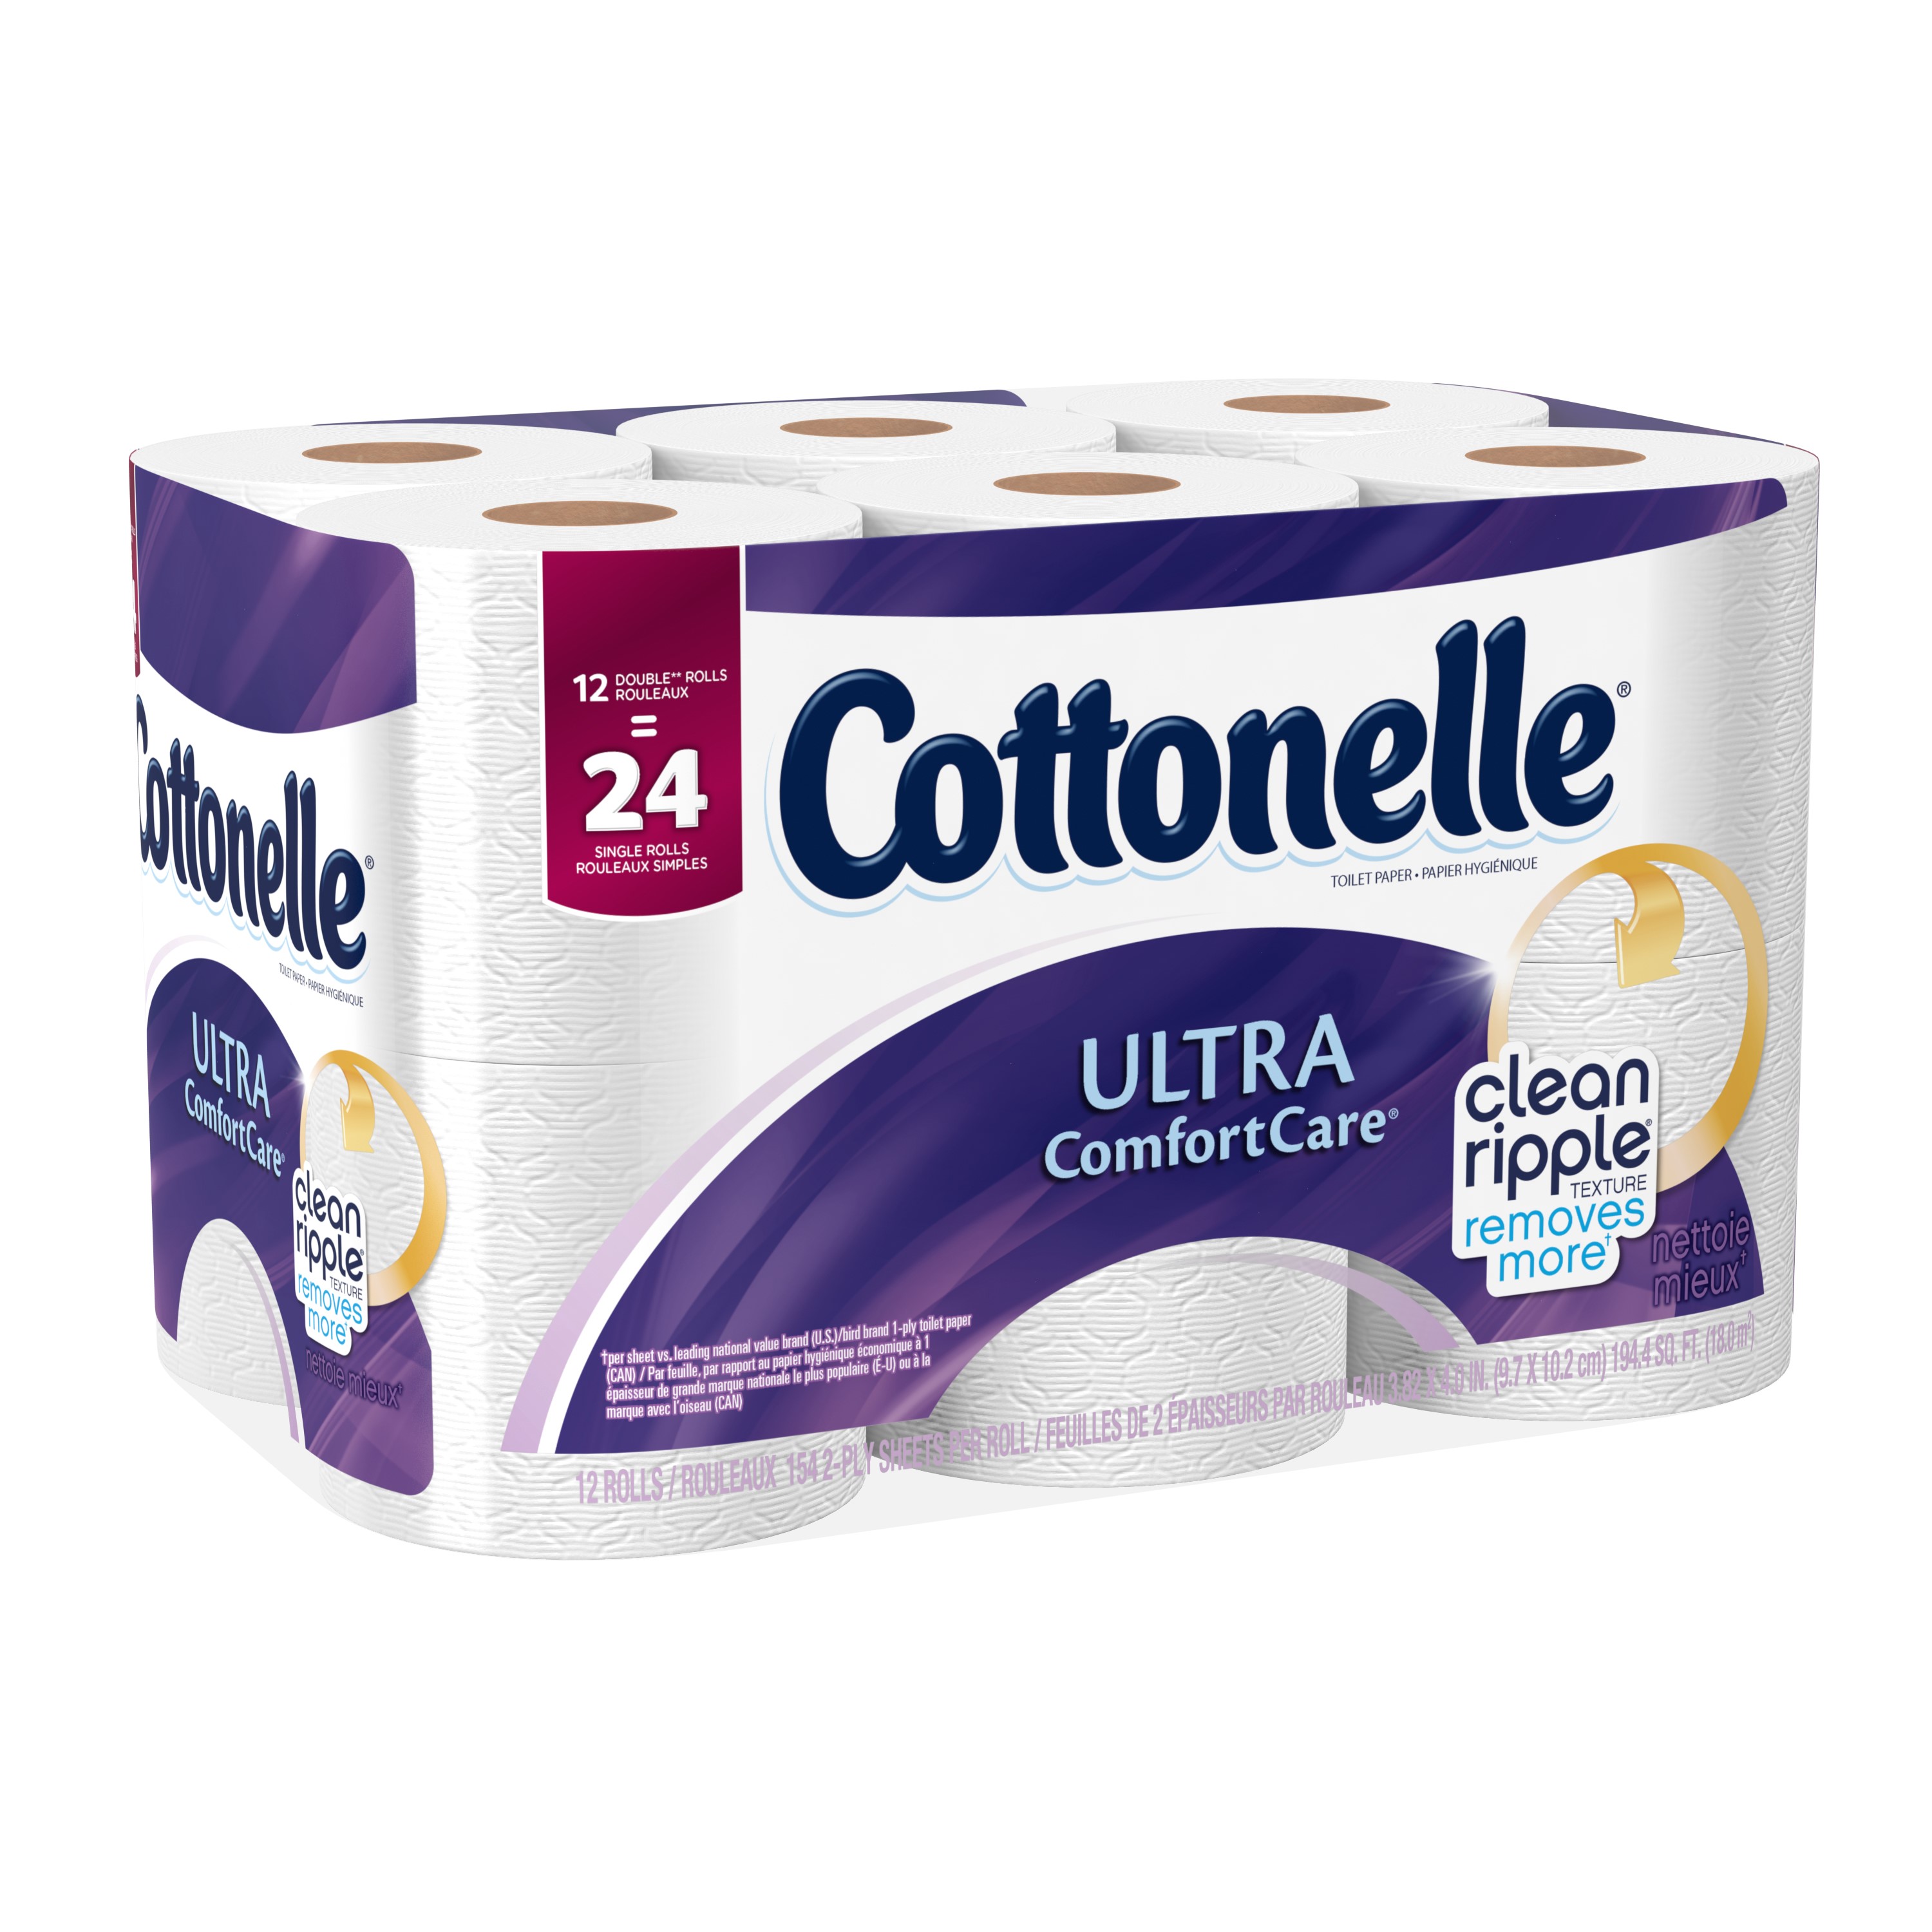 Cottonelle Ultra Comfort Toilet Paper, 12 Double Rolls, 154 Sheets per Roll (1,848 Total) - image 3 of 9